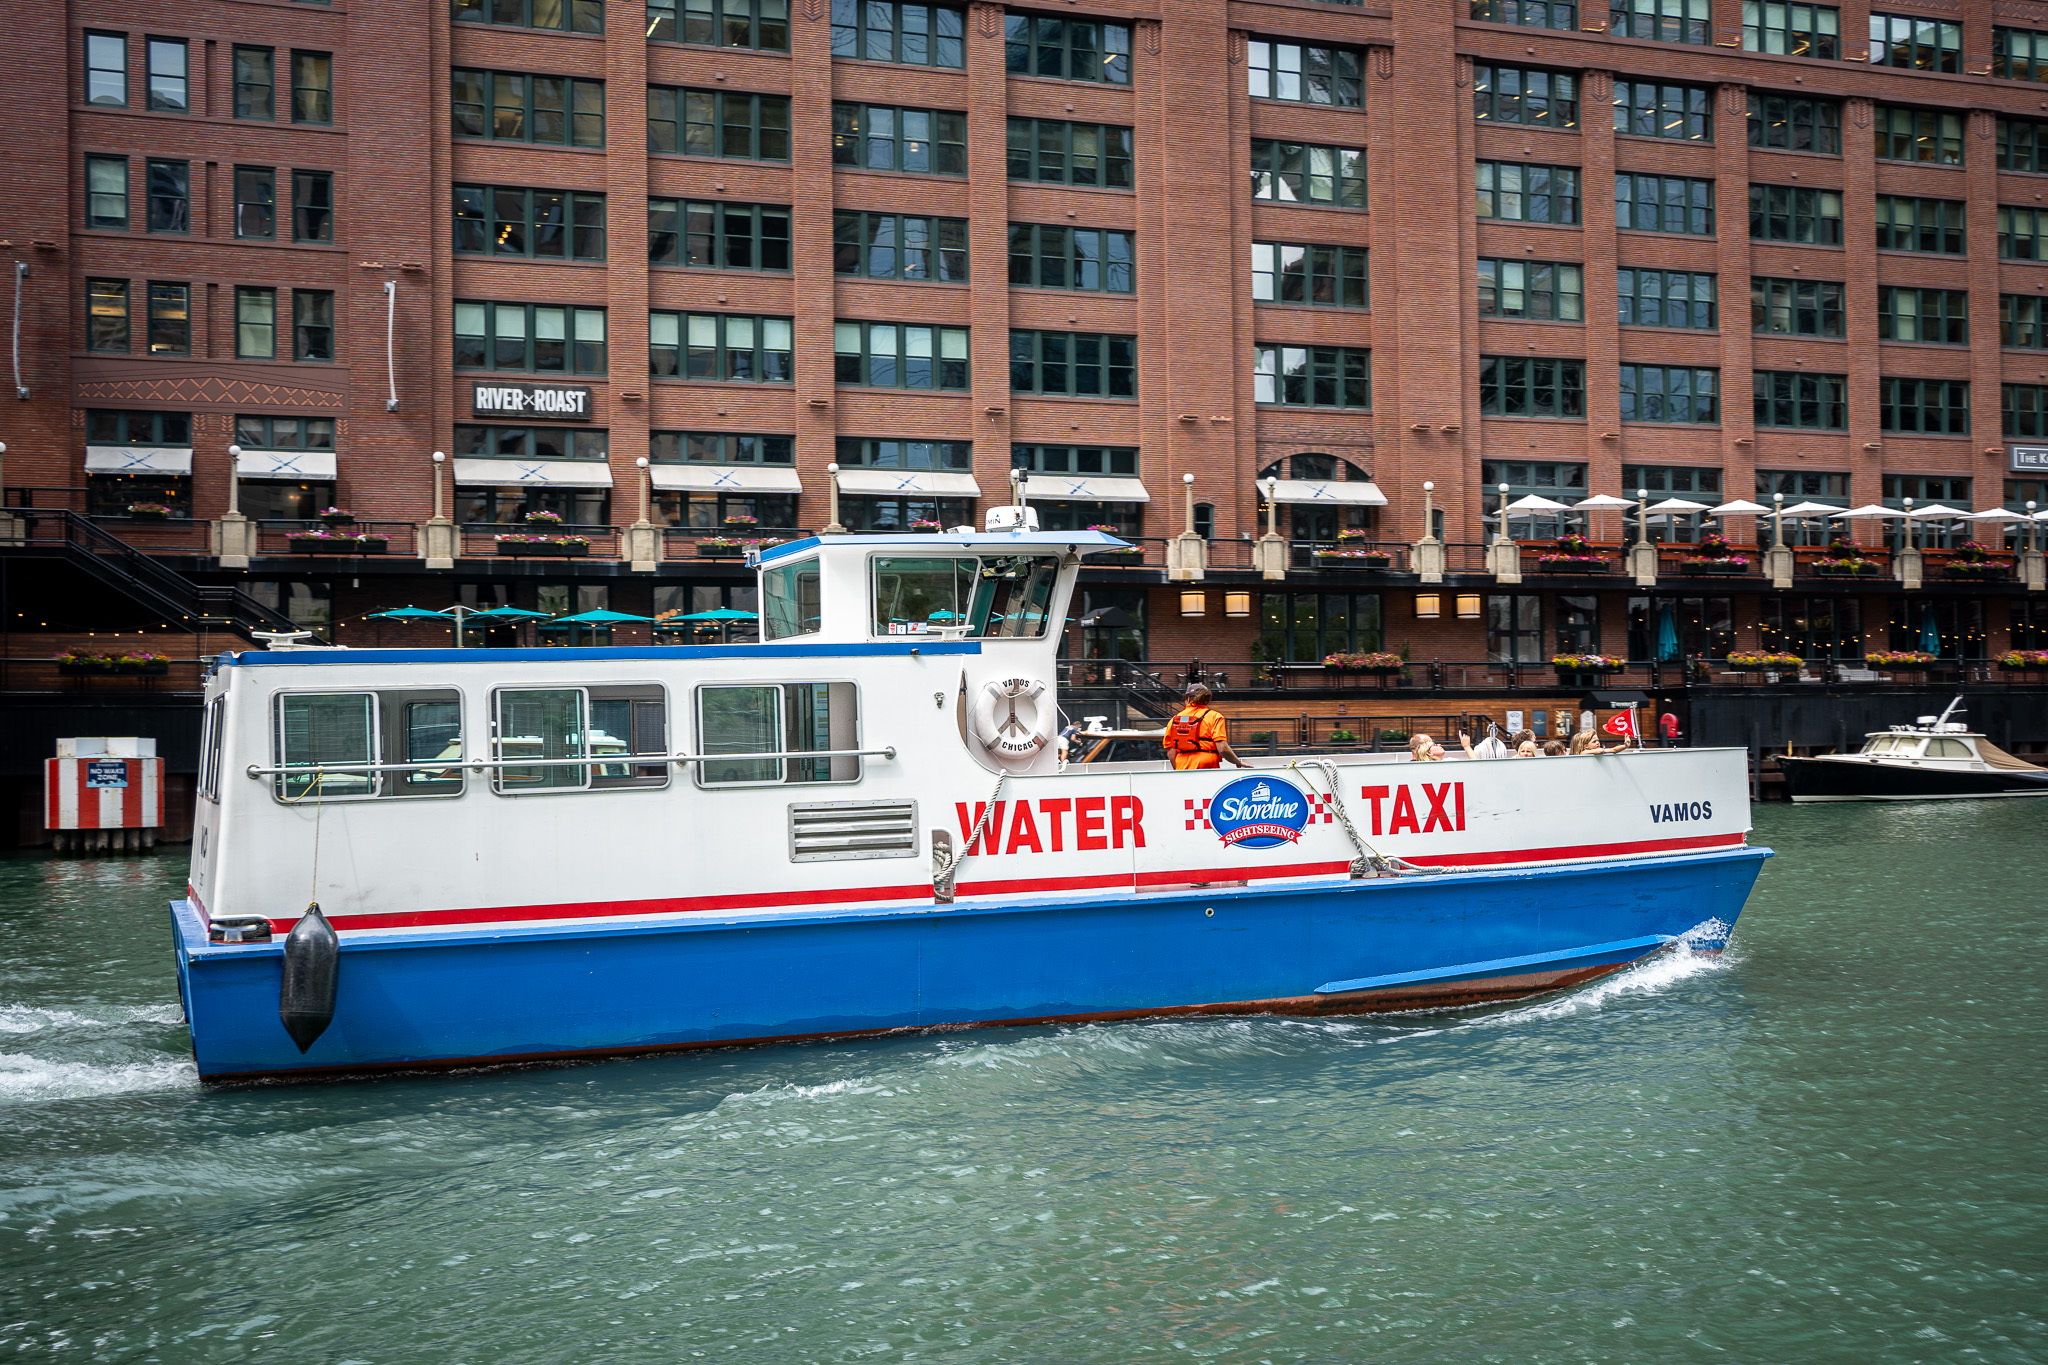 Take the Chicago Water Taxi